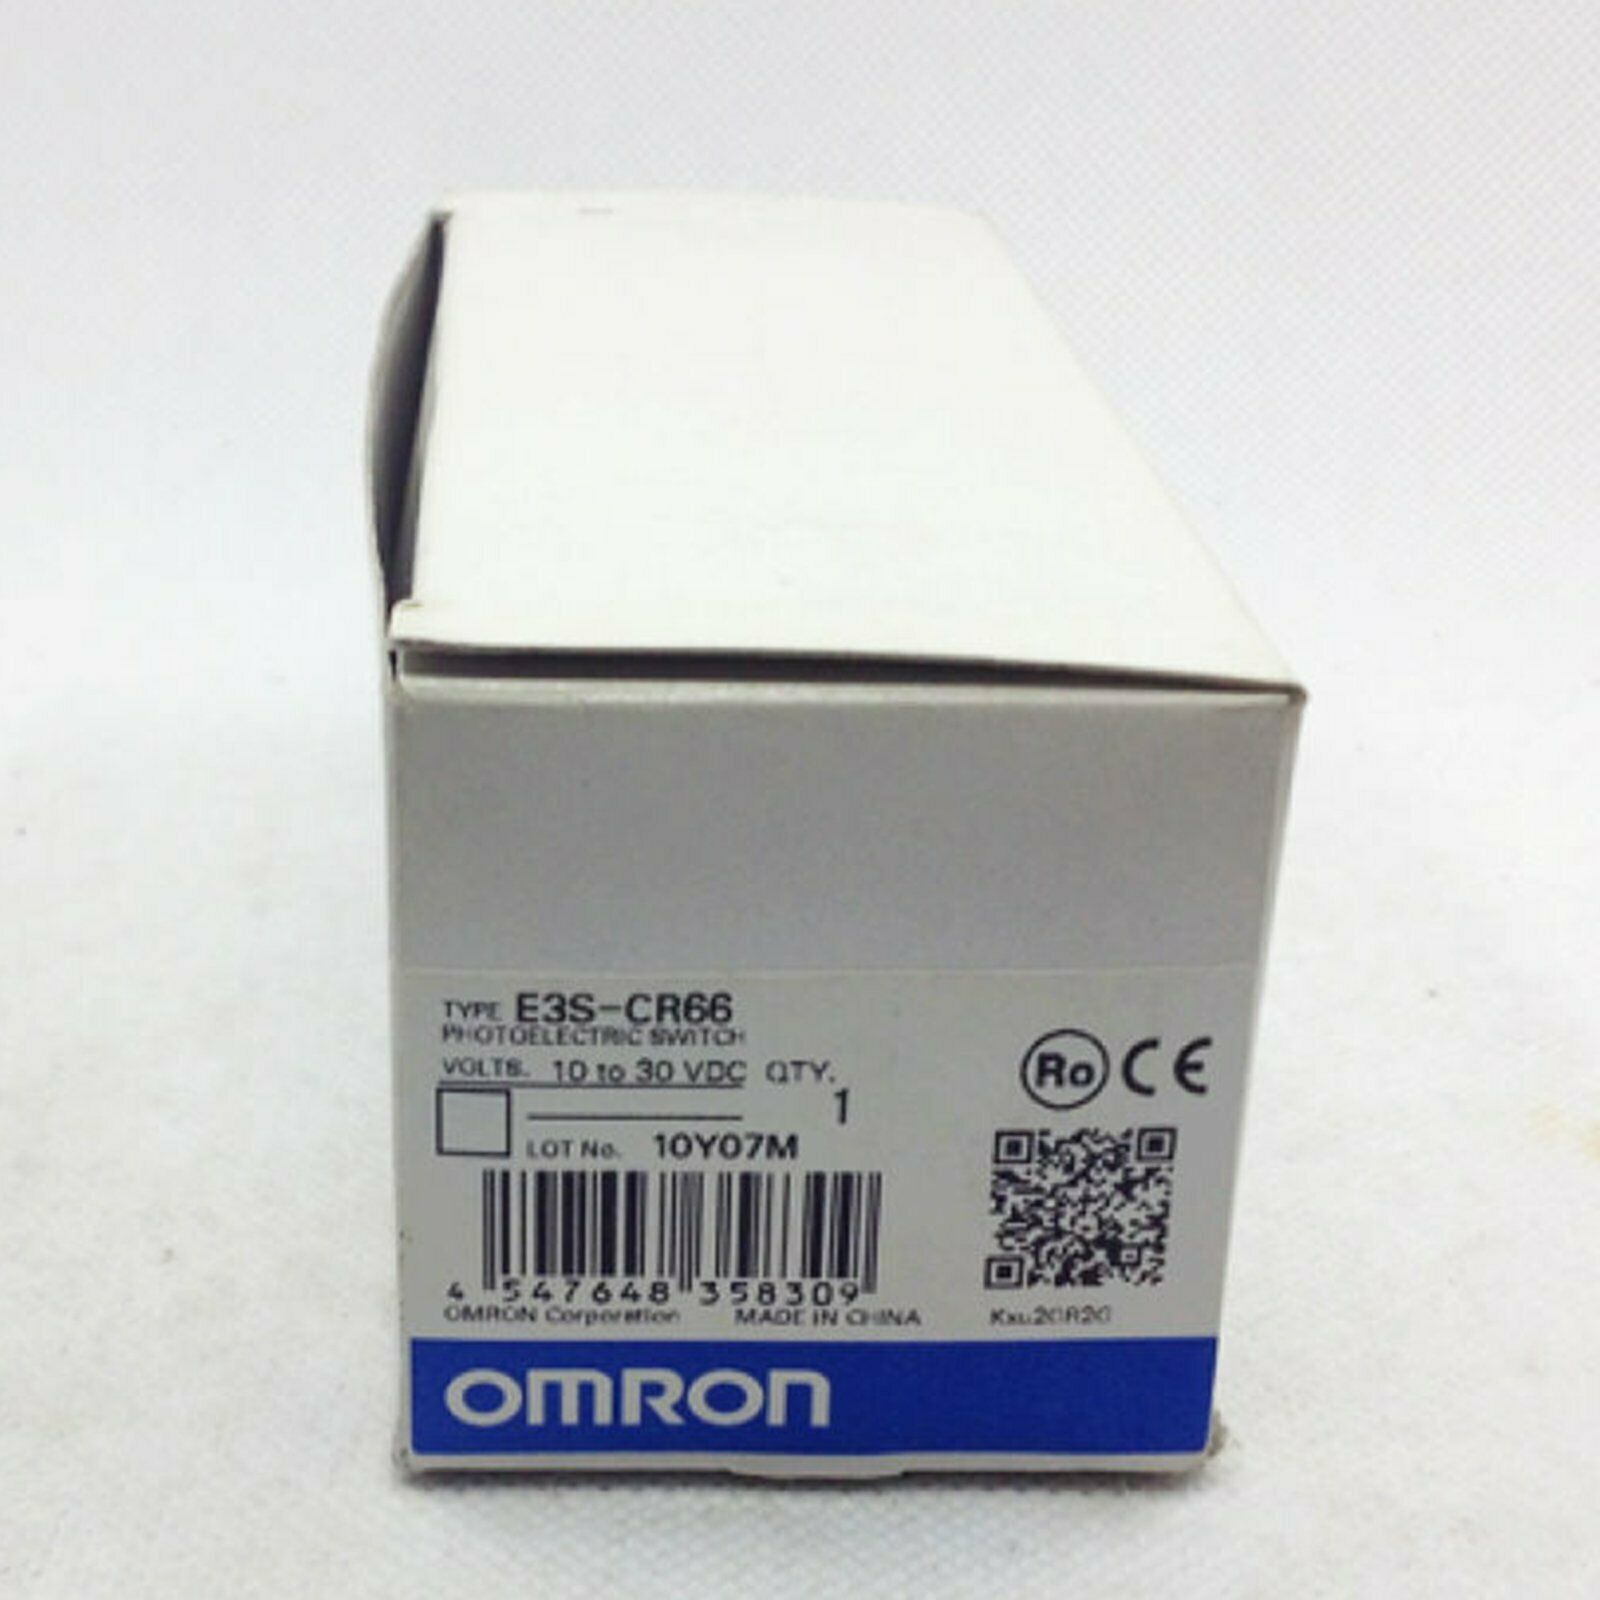 1Pcs New In Box OMRON E3S-CR66 Photoelectric Sensors KOEED 201-500, 90%, import_2020_10_10_031751, Omron, Other